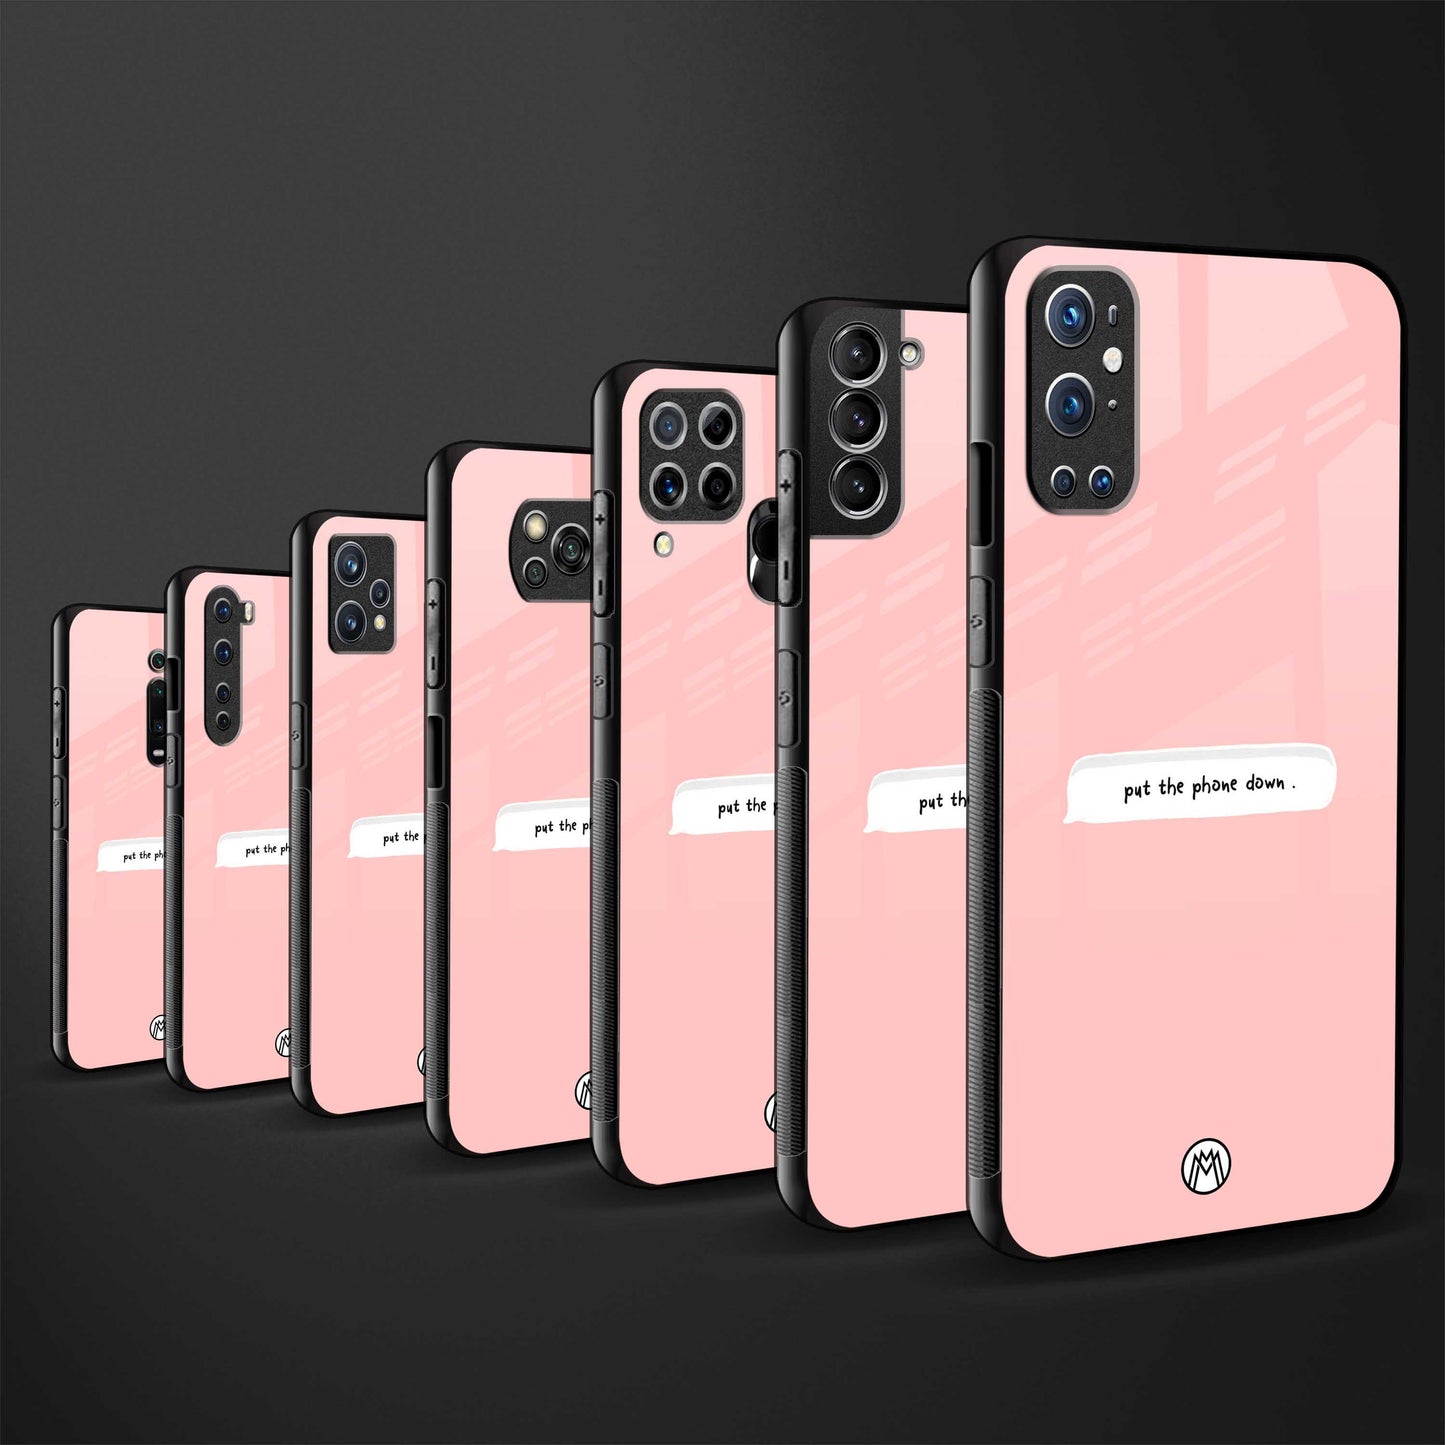 put the phone down glass case for iphone xs max image-3